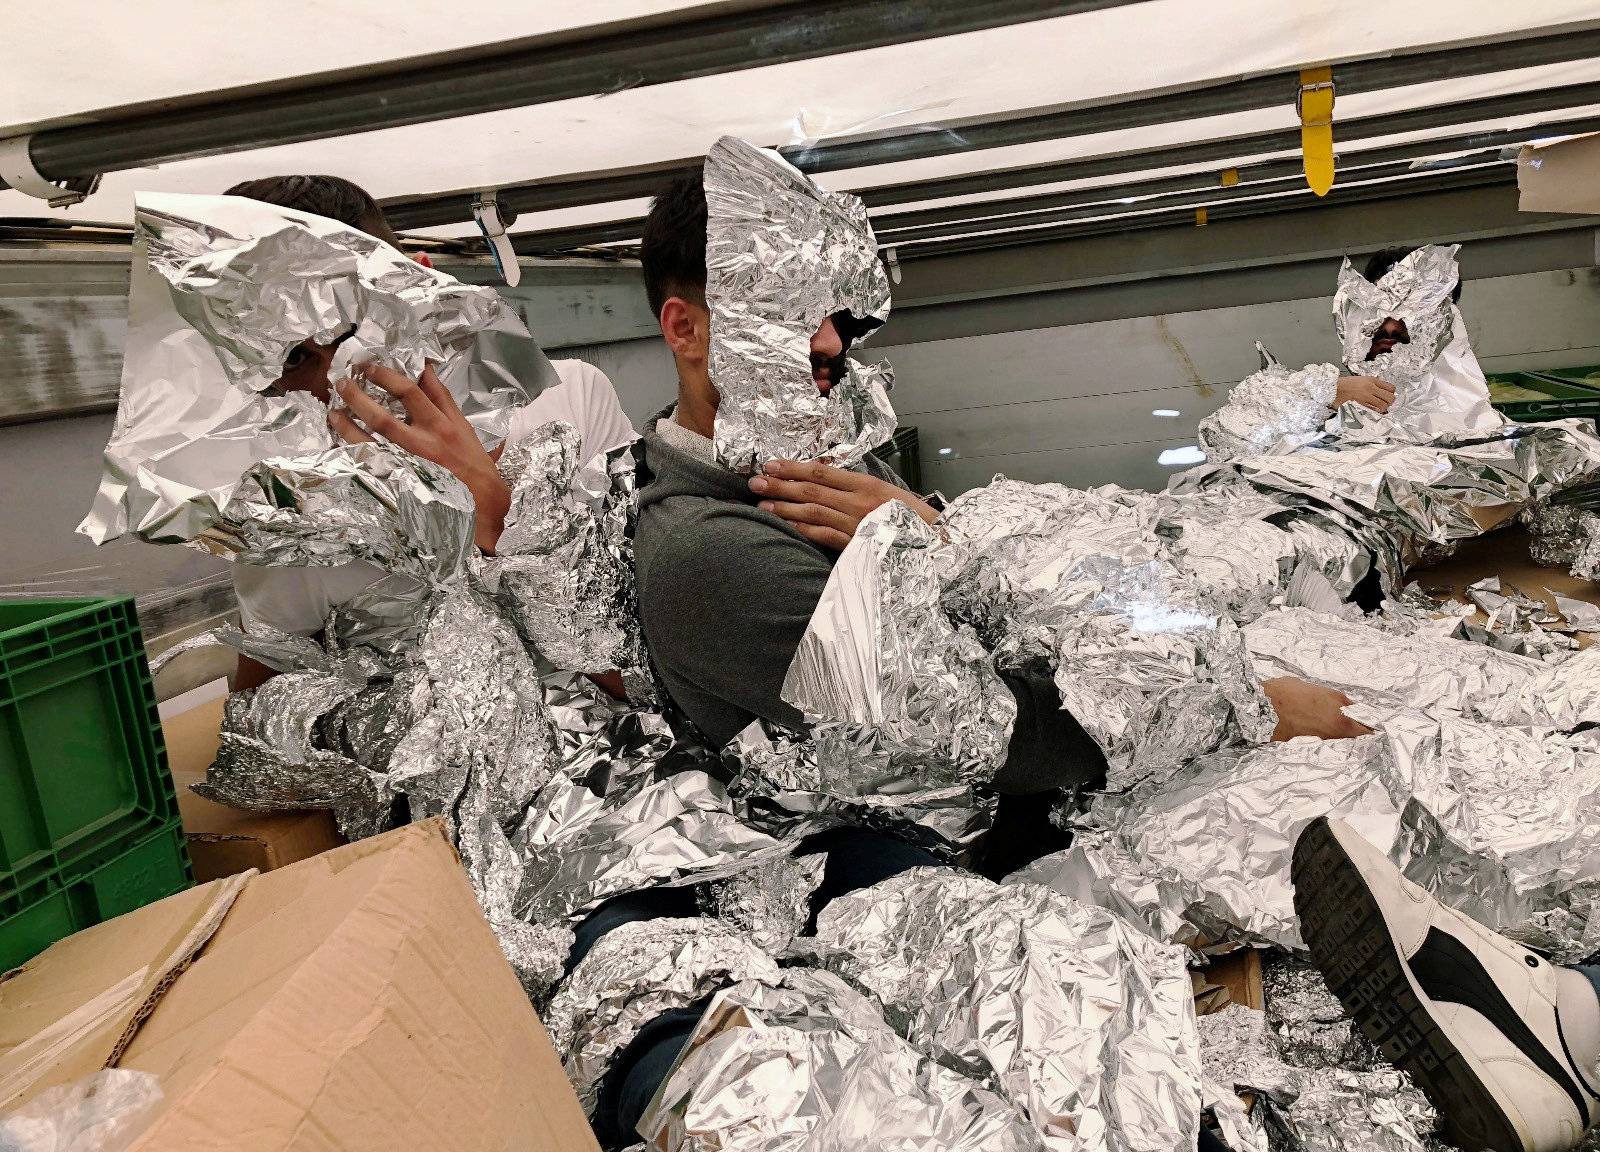 3 of the 7 Iraqi refugees wrapped in aluminium foil to hide from an x-ray detector are pictured inside a truck at Pendik Port as they try to reach Italy in Istanbul